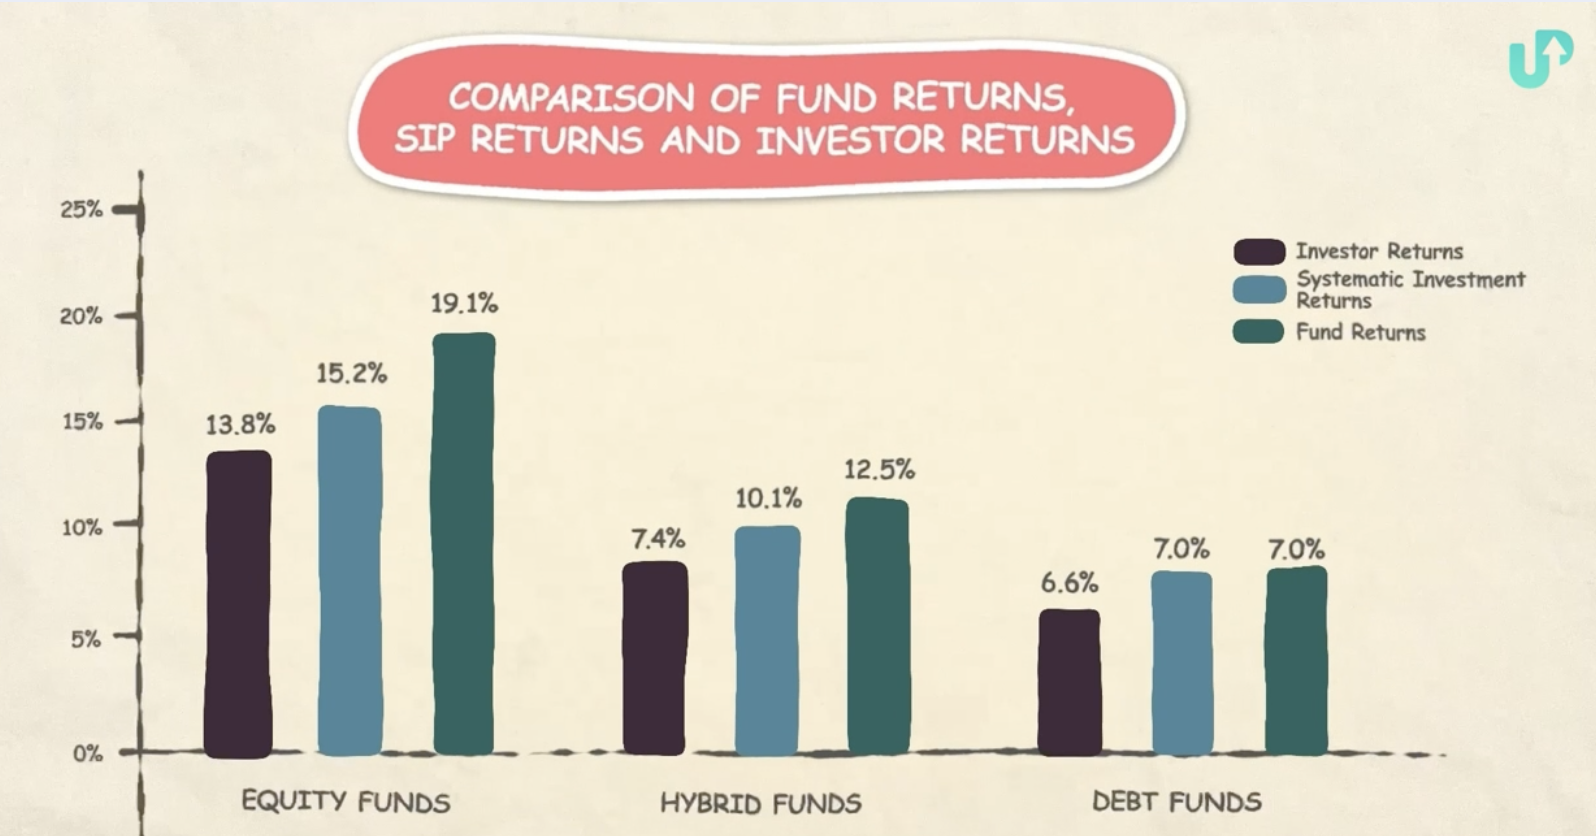 Comparison of fund returns, SIP returns, and investor returns across types of funds